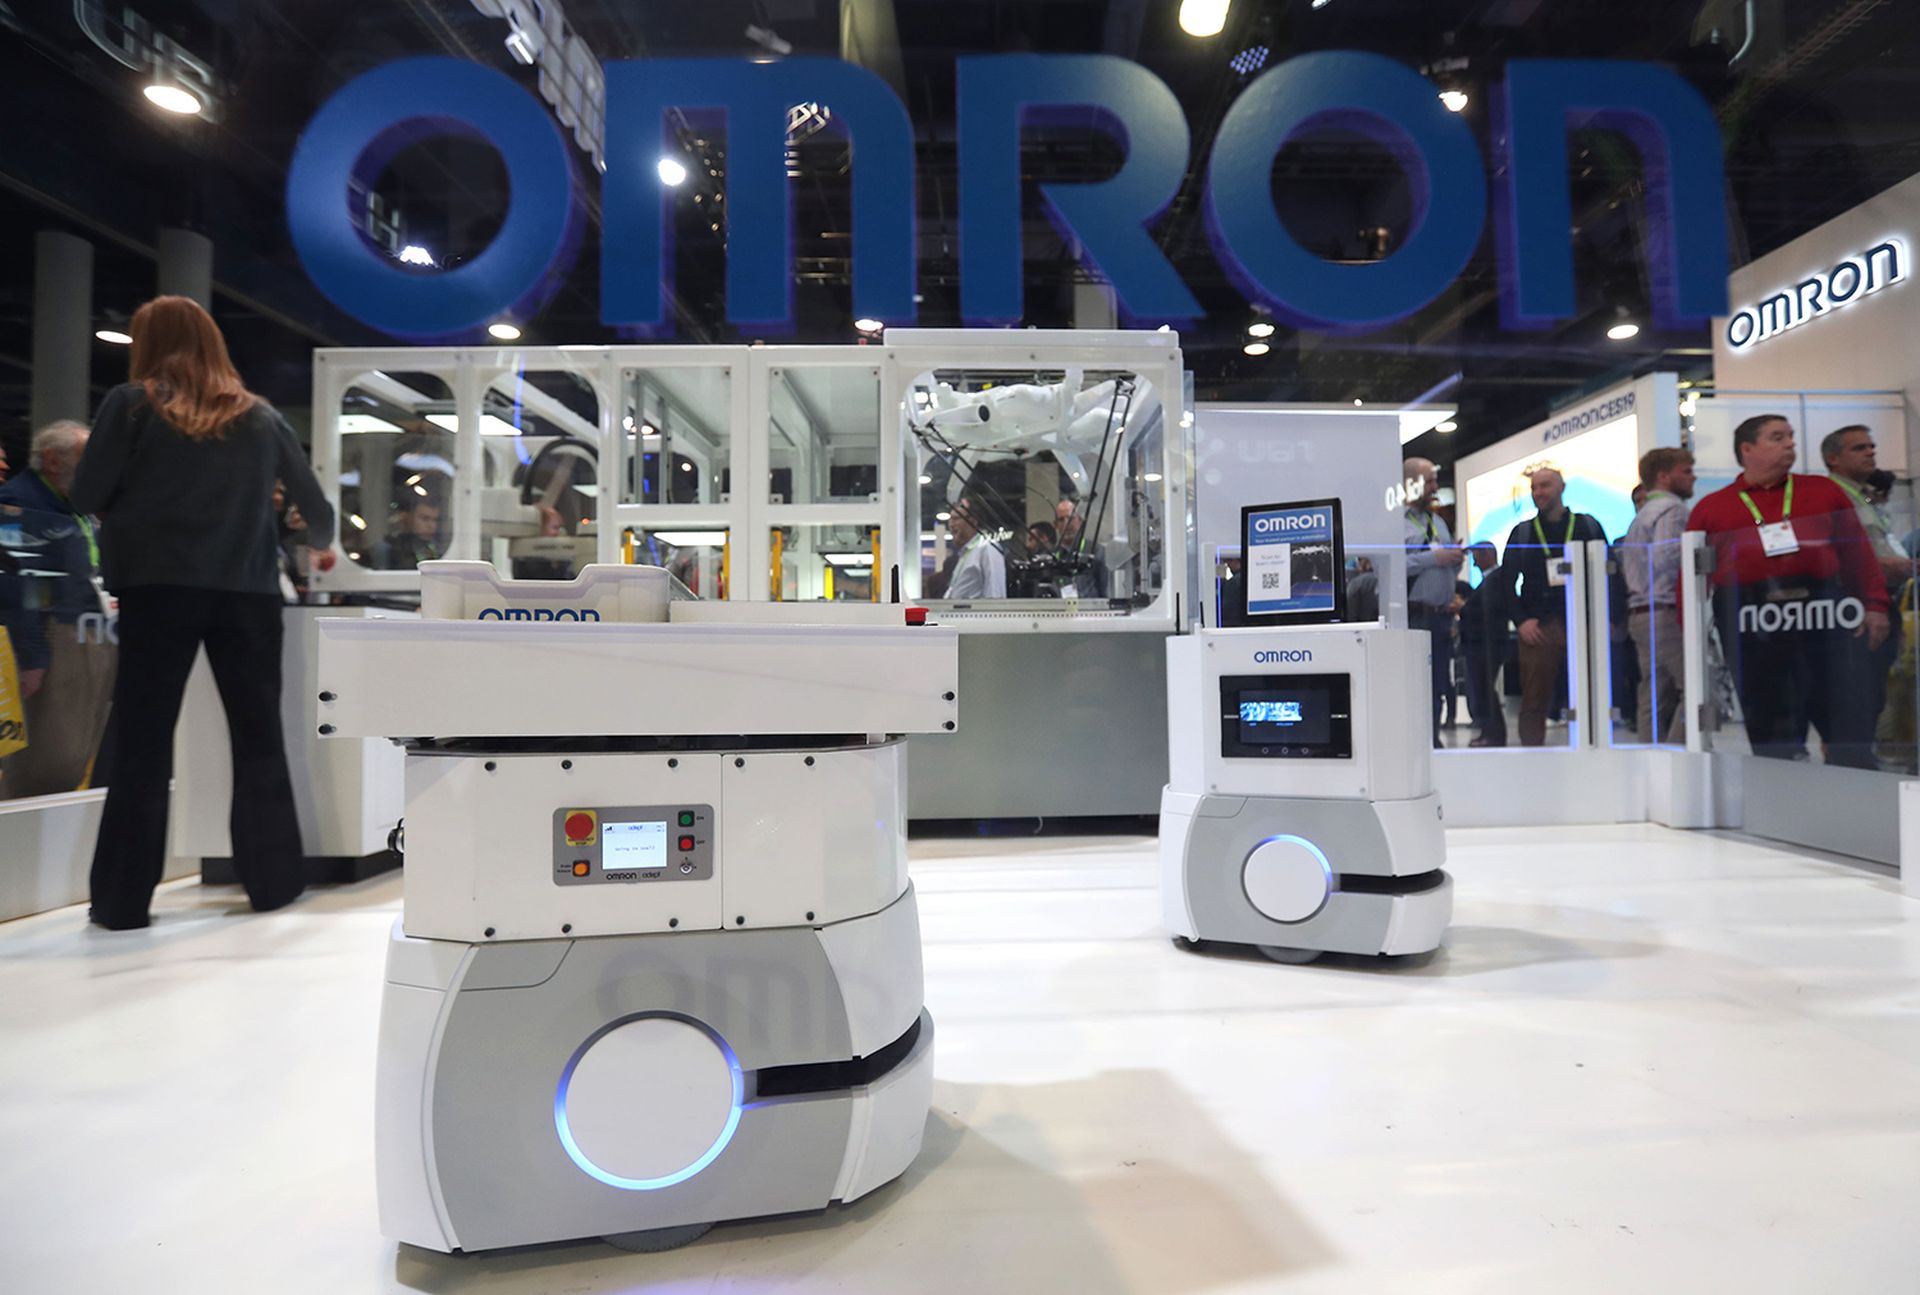 ForeScout&#8217;s Vedere Labs published 56 OT vulnerabilities affecting 10 major vendors on Tuesday, including Omron. Pictured: Industrial robots are demonstrated at the Omron booth during CES 2019 at the Las Vegas Convention Center on Jan. 9, 2019, in Las Vegas. (Photo by Justin Sullivan/Getty Images)